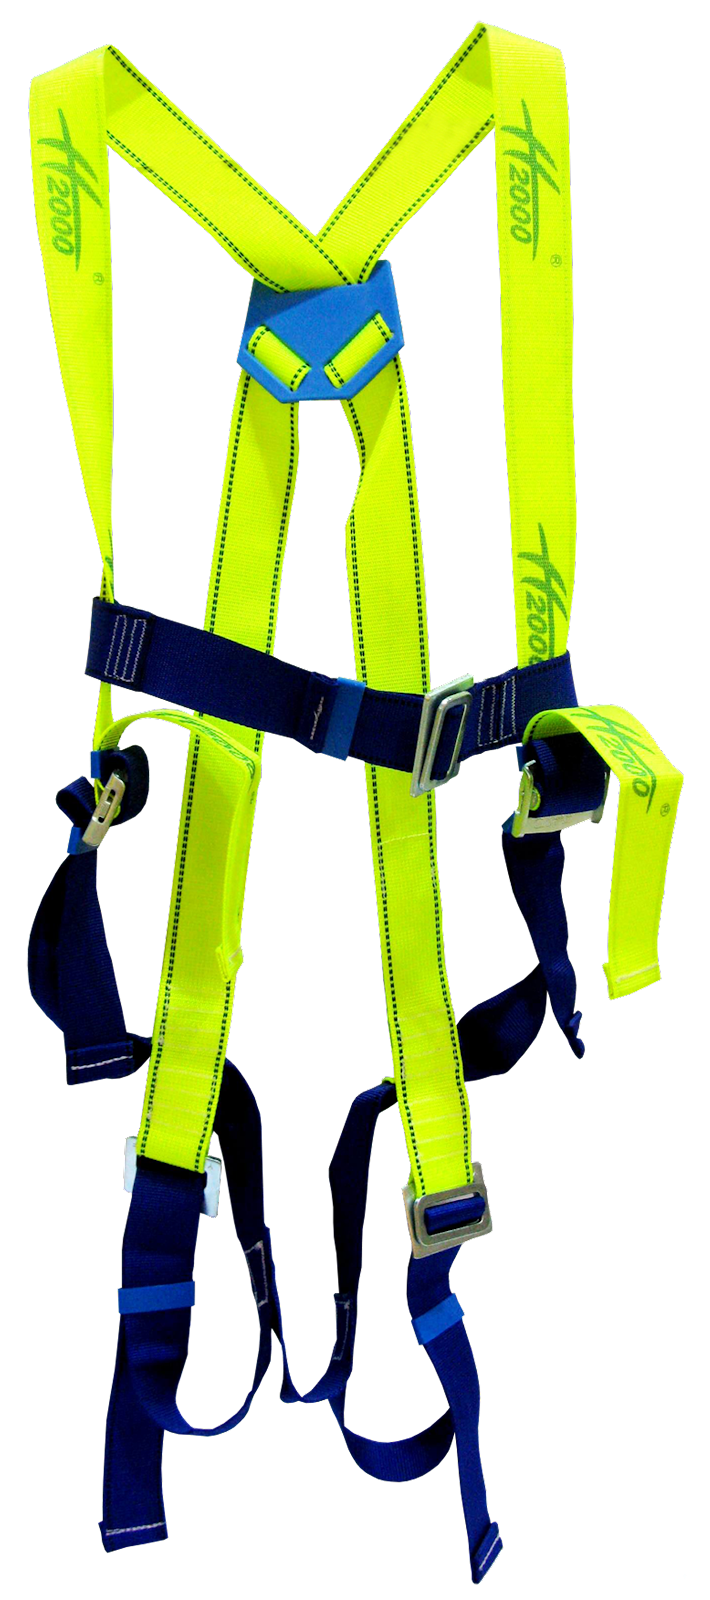 Allsafe Safety Harness